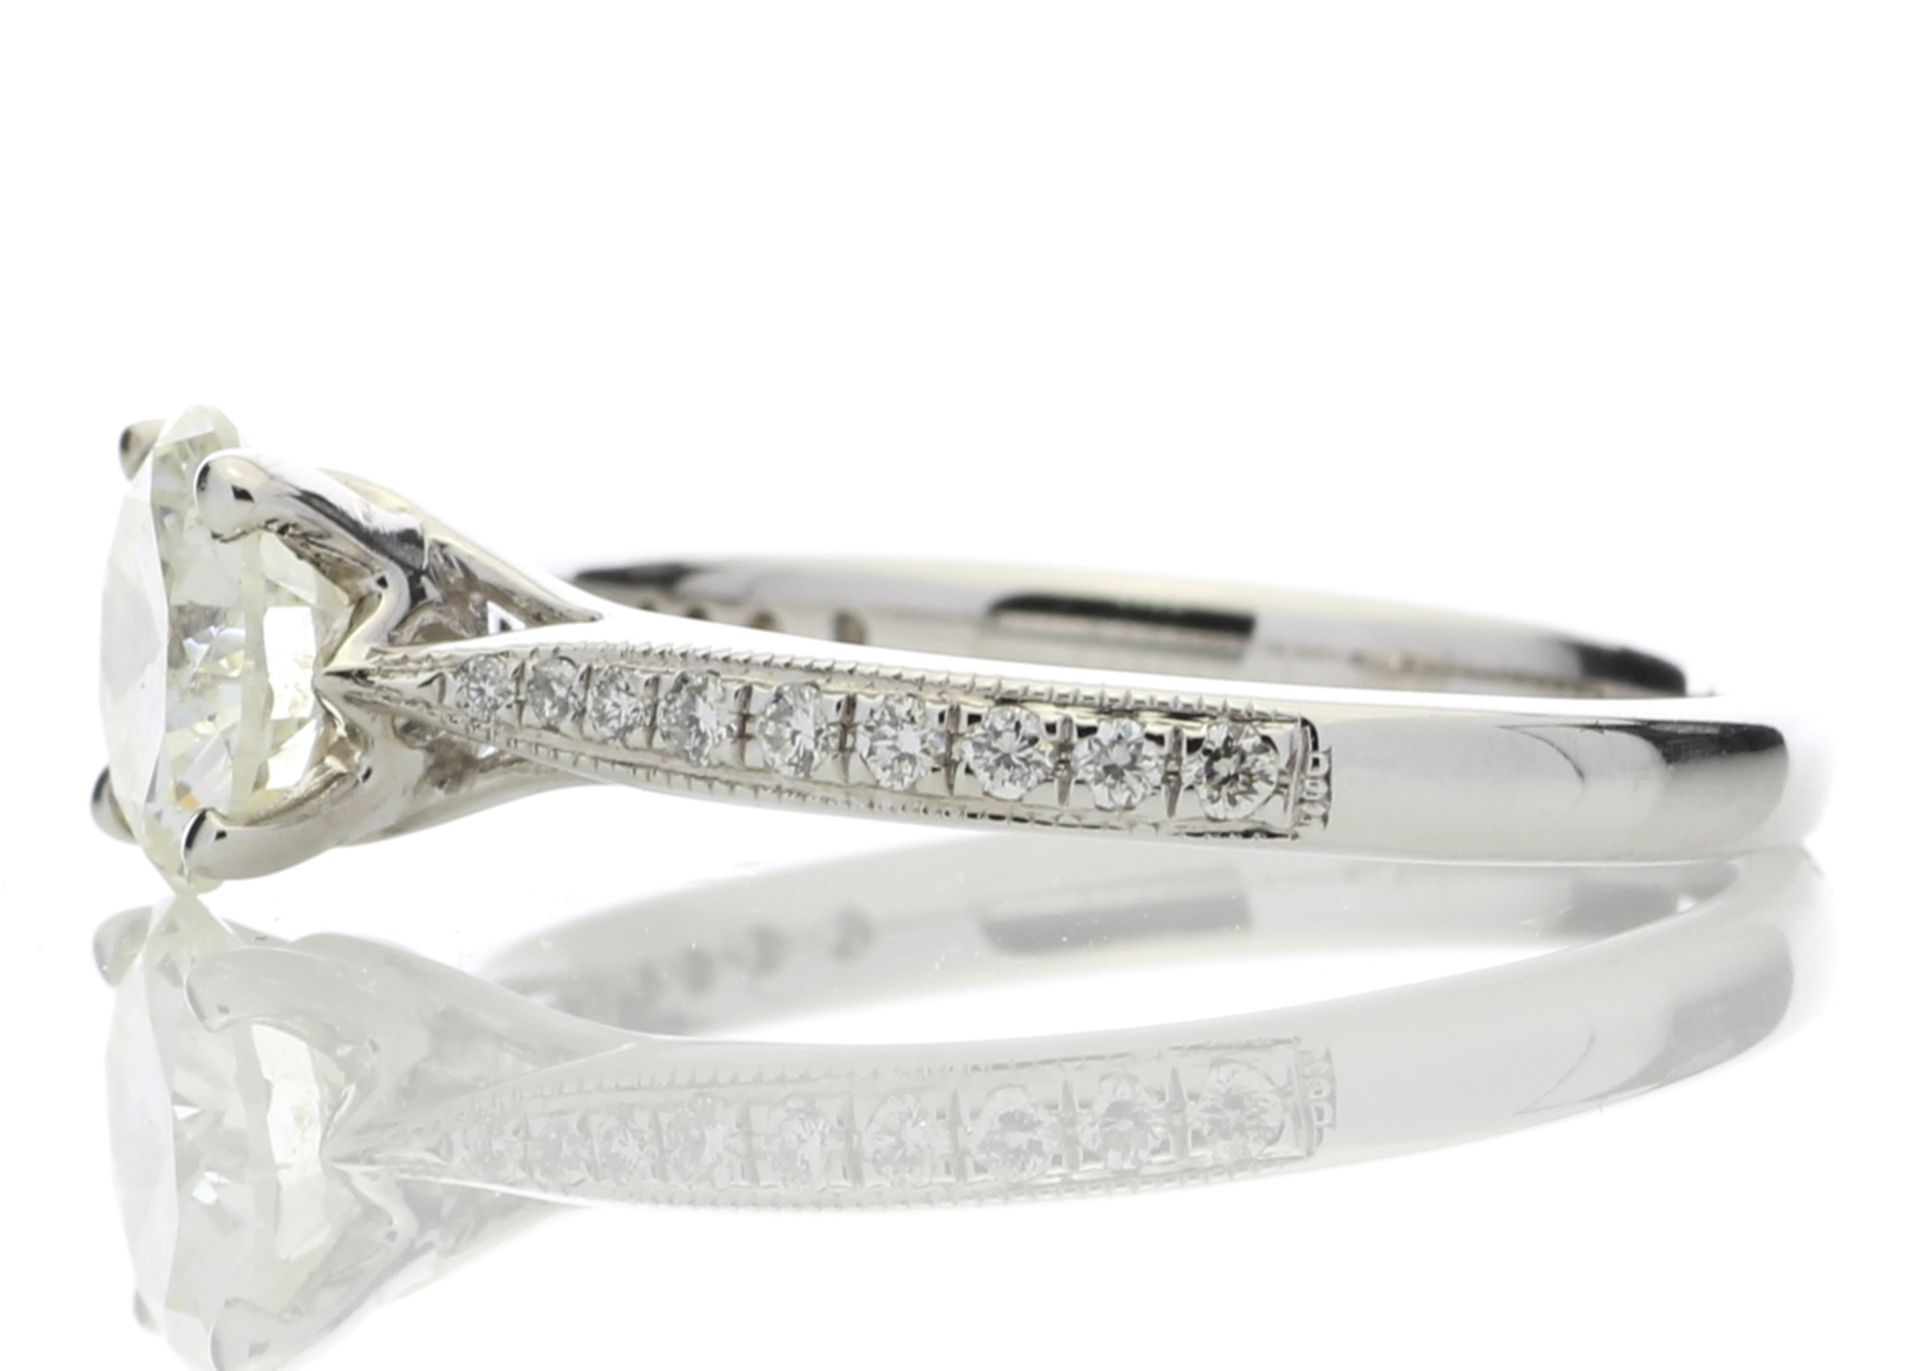 18ct White Gold Diamond Ring With Stone Set Shoulders 1.15 Carats - Valued By GIE £26,750.00 - One - Image 3 of 5